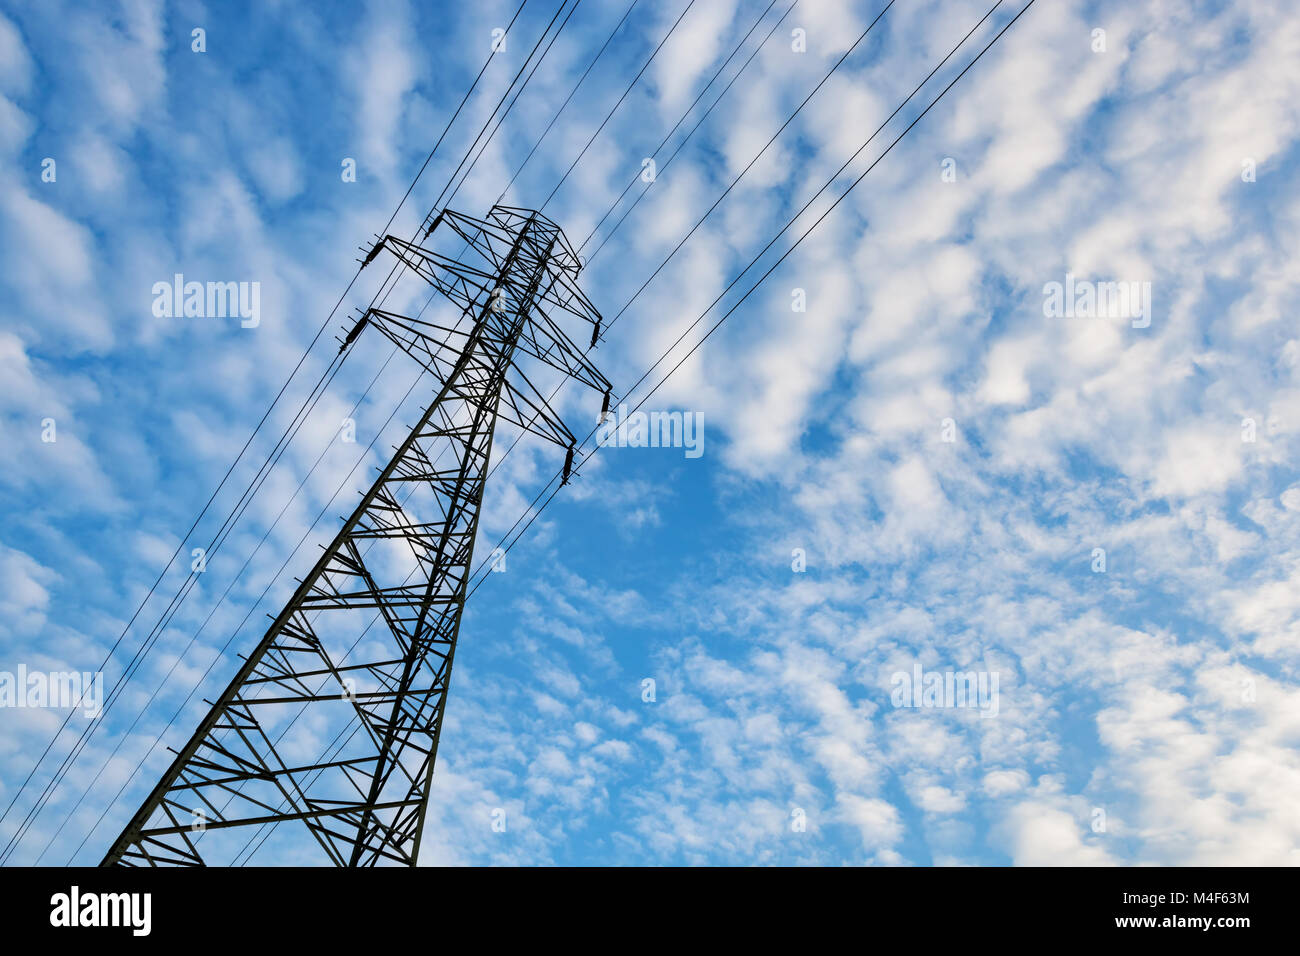 Electricity transmission pylon against blue sky with fluffy clouds Stock Photo